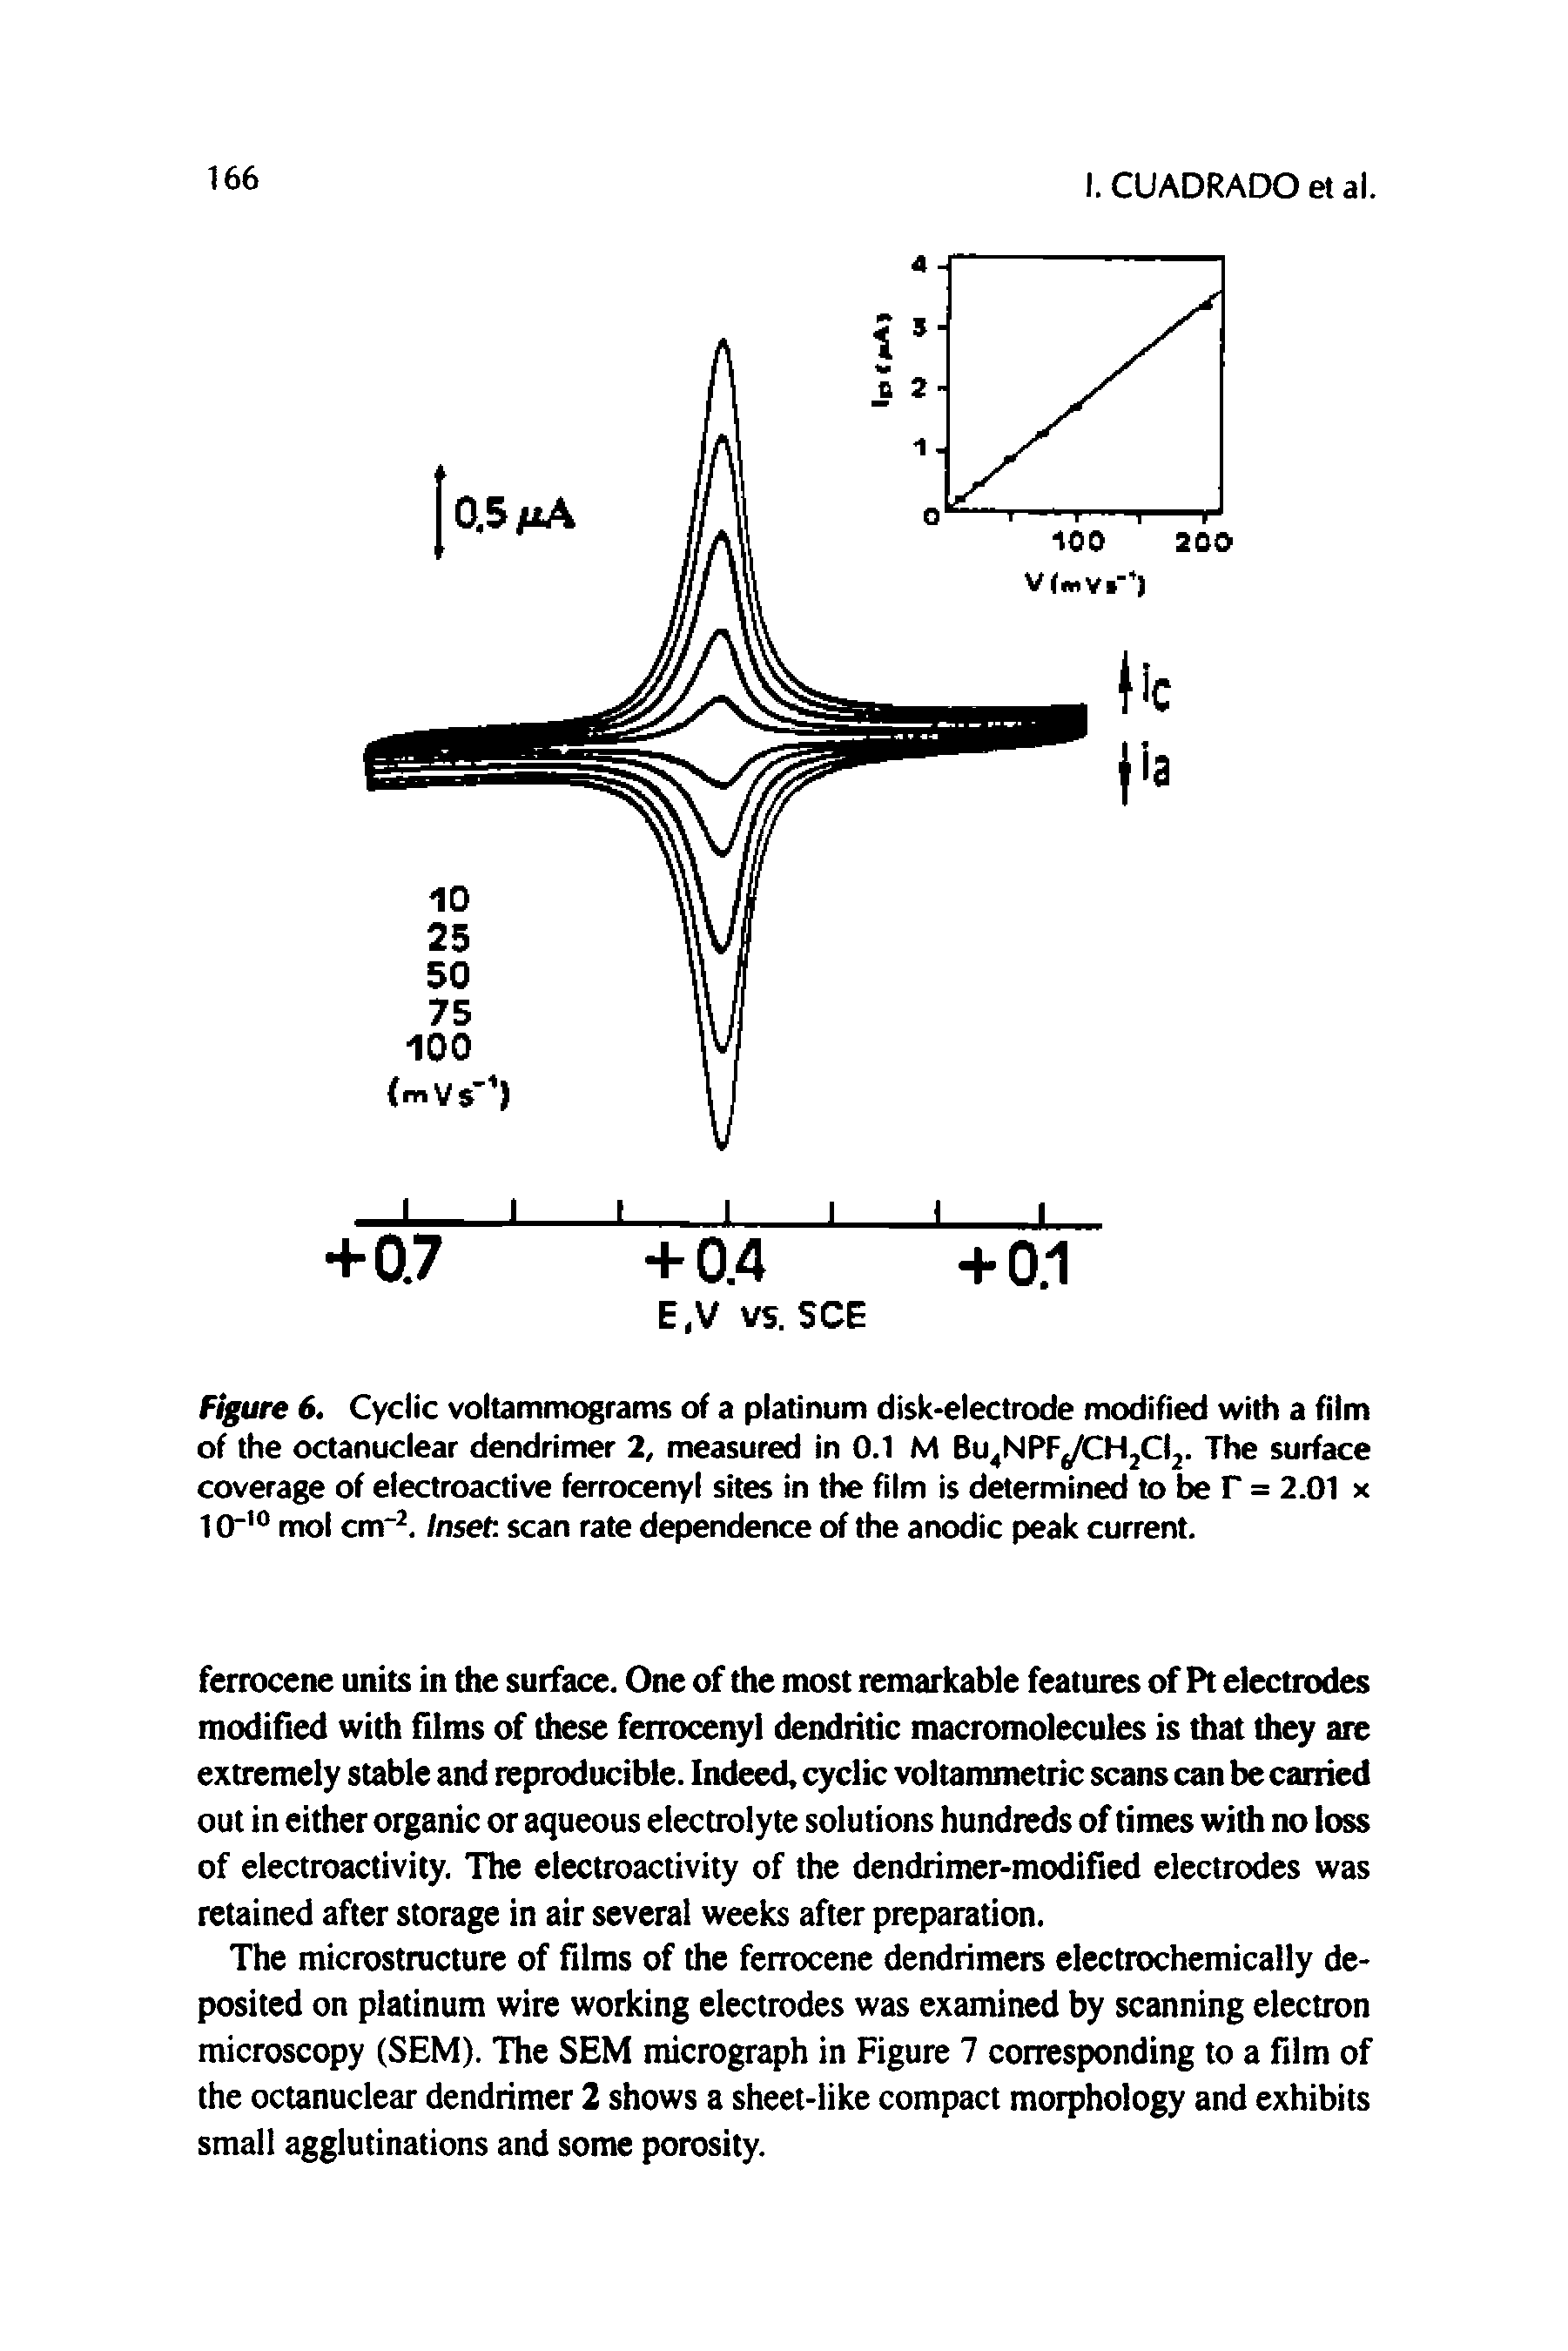 Figure 6. Cyclic voltammograms of a platinum disk-electrode modified with a film of the octanuclear dendrimer 2, measured in 0.1 M Bu NPFj/CHjClj. The surface coverage of electroactive ferrocenyl sites in the film is determined to be T = 2.01 x 10" mol cm . inset, scan rate dependence of the anodic peak current.